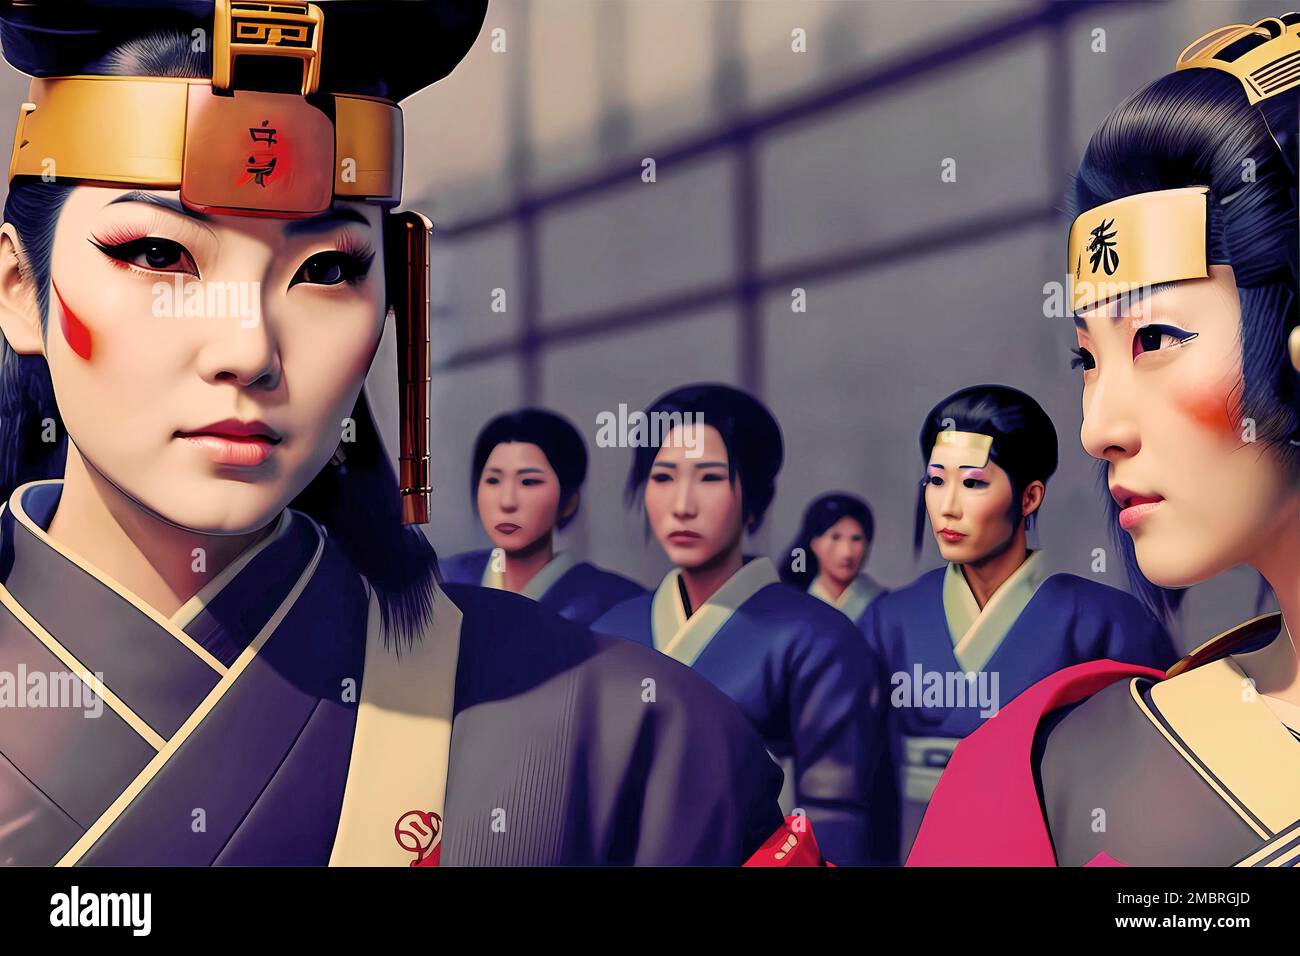 Old-fashioned female Japanese officers stand in front of a group of female soldiers in kimonos, fictional person, made with generative AI Stock Photo